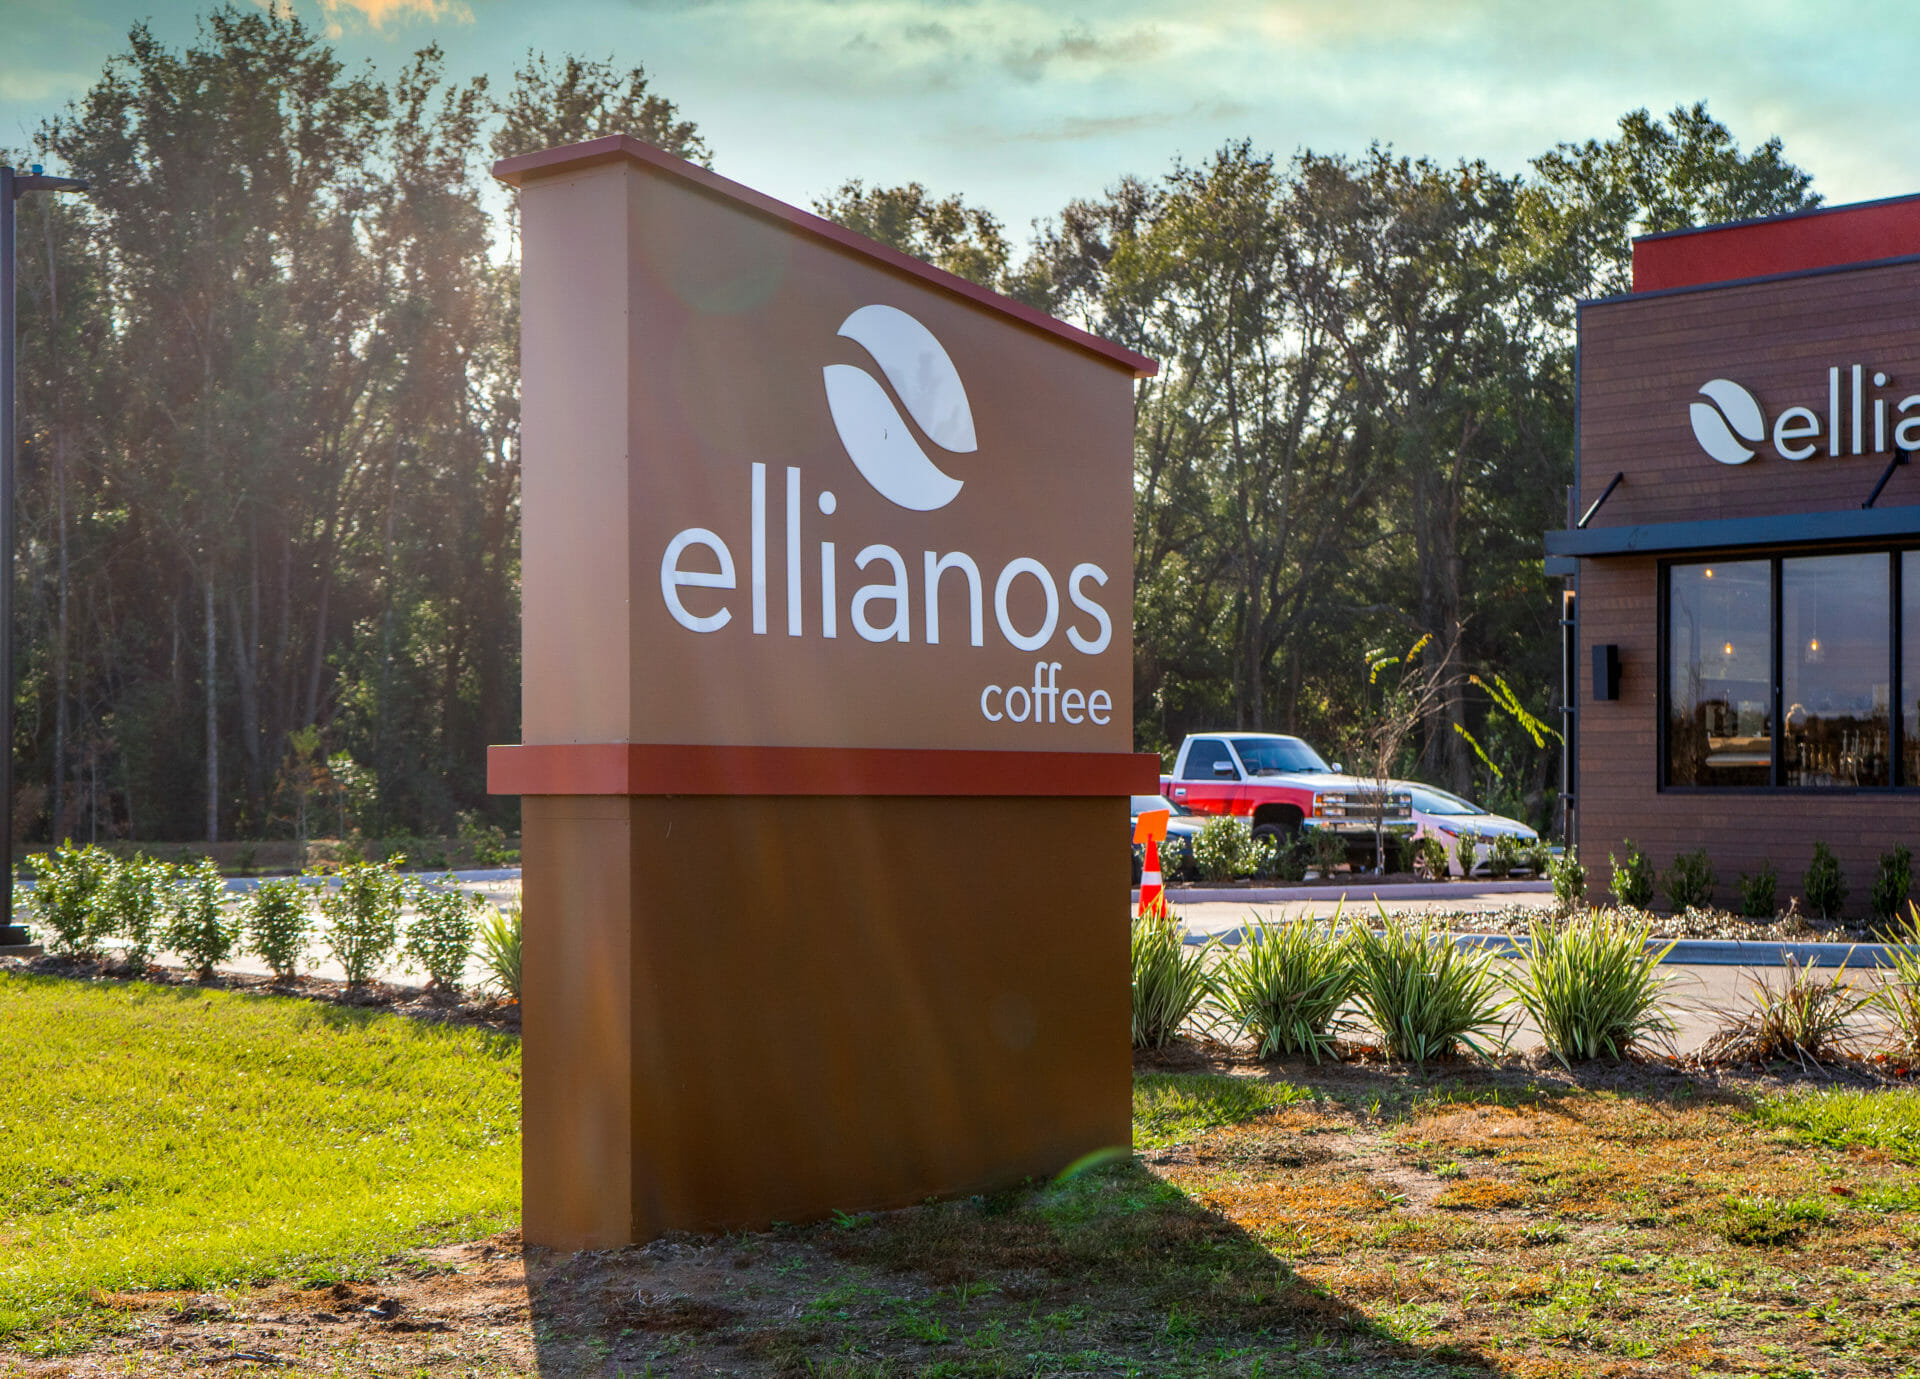 Ellianos Coffee Drive-Thru Franchise Expanding into Gainesville, Florida